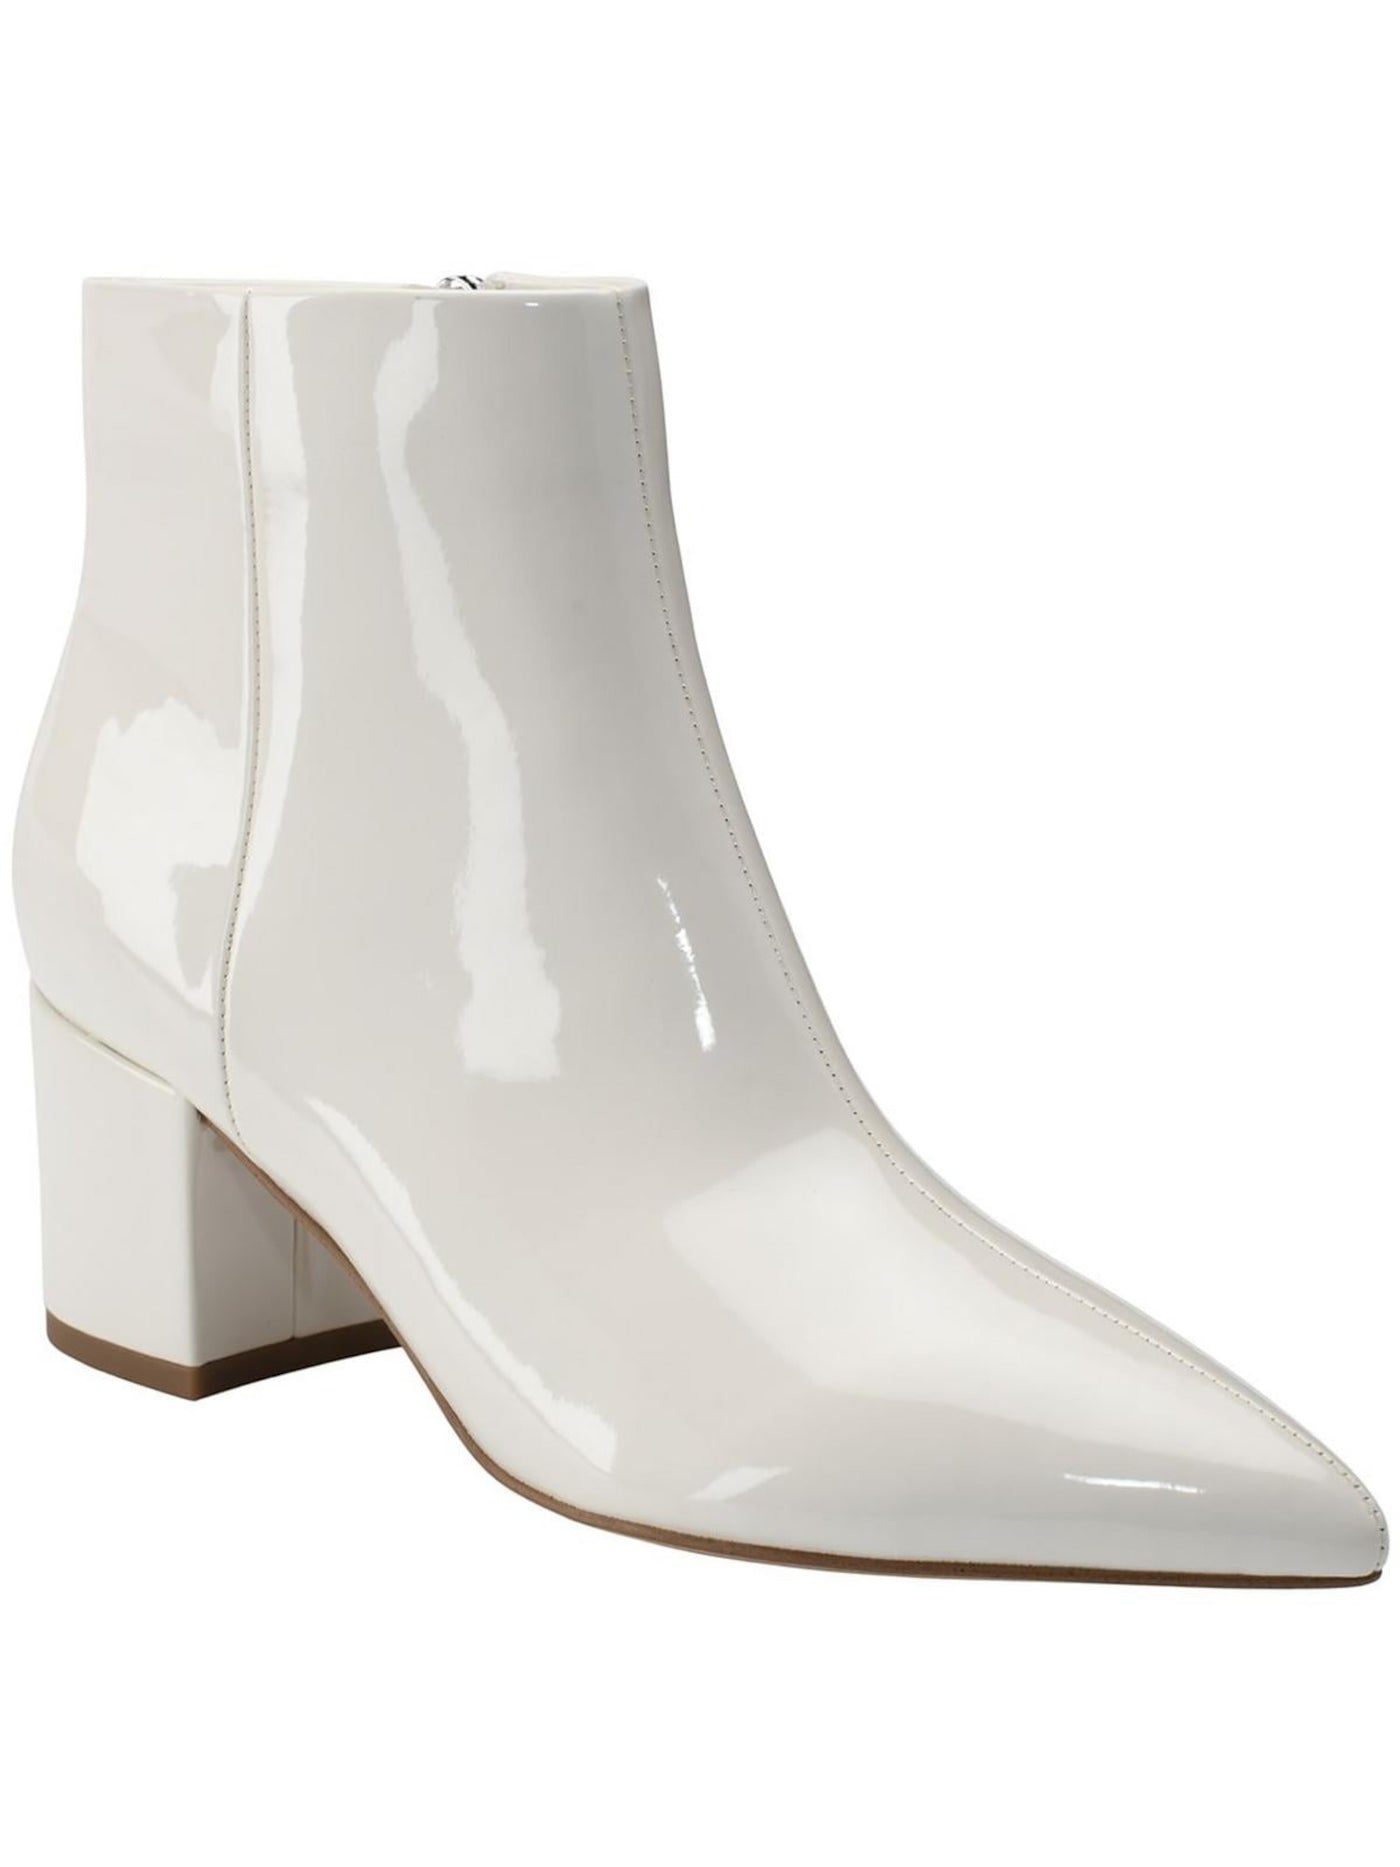 MARC FISHER Womens Ivory Padded Jelly Pointy Toe Block Heel Zip-Up Dress Booties 9.5 M